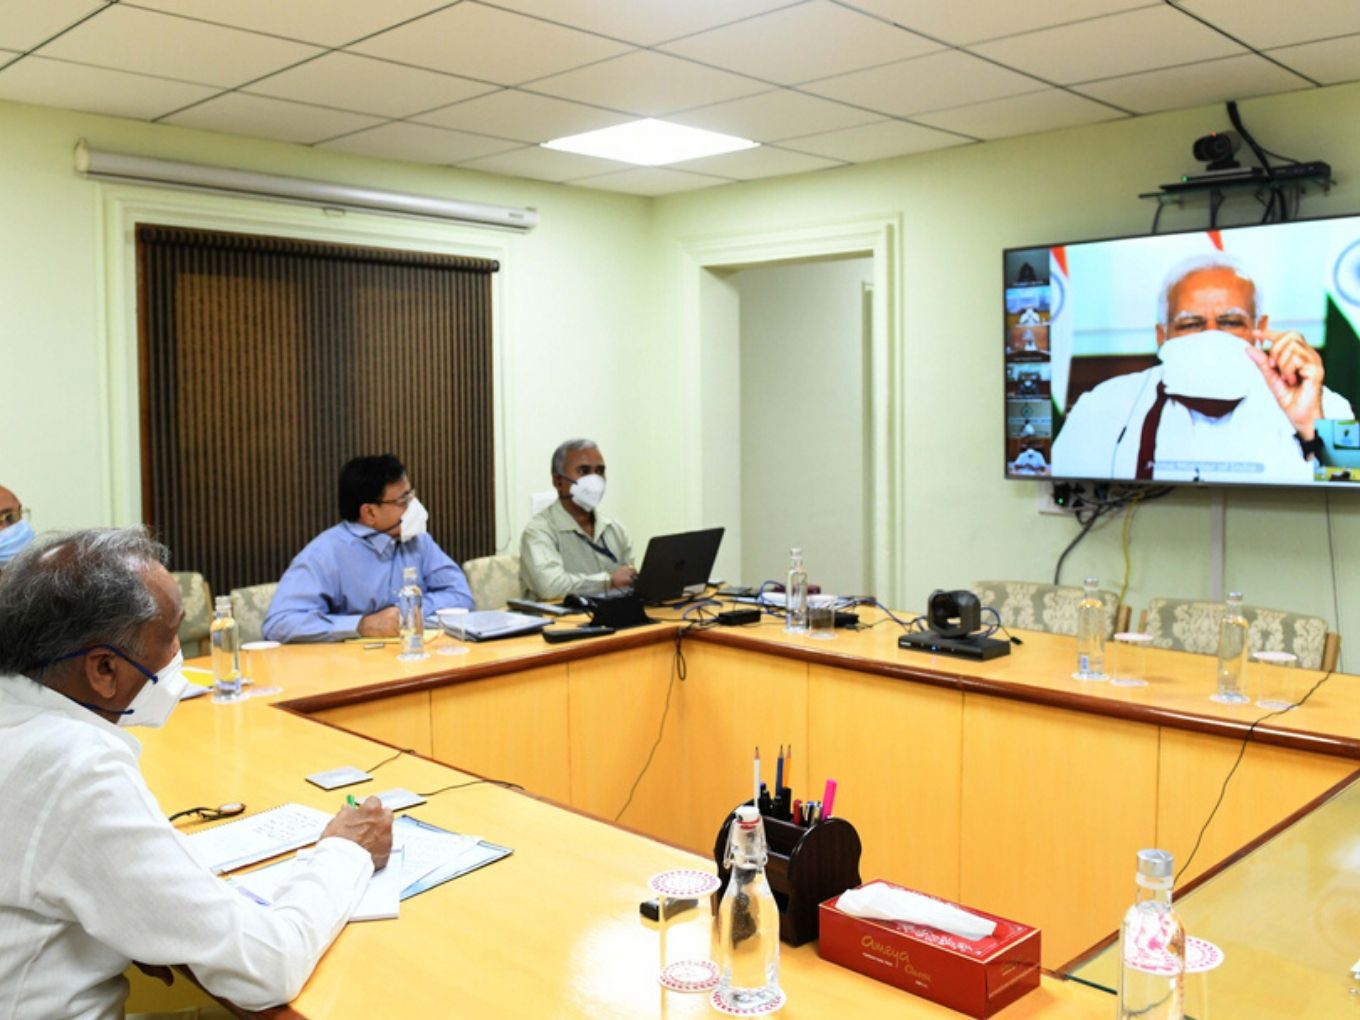 Indian Govt To Develop Video Conferencing Tool To Take On Zoom